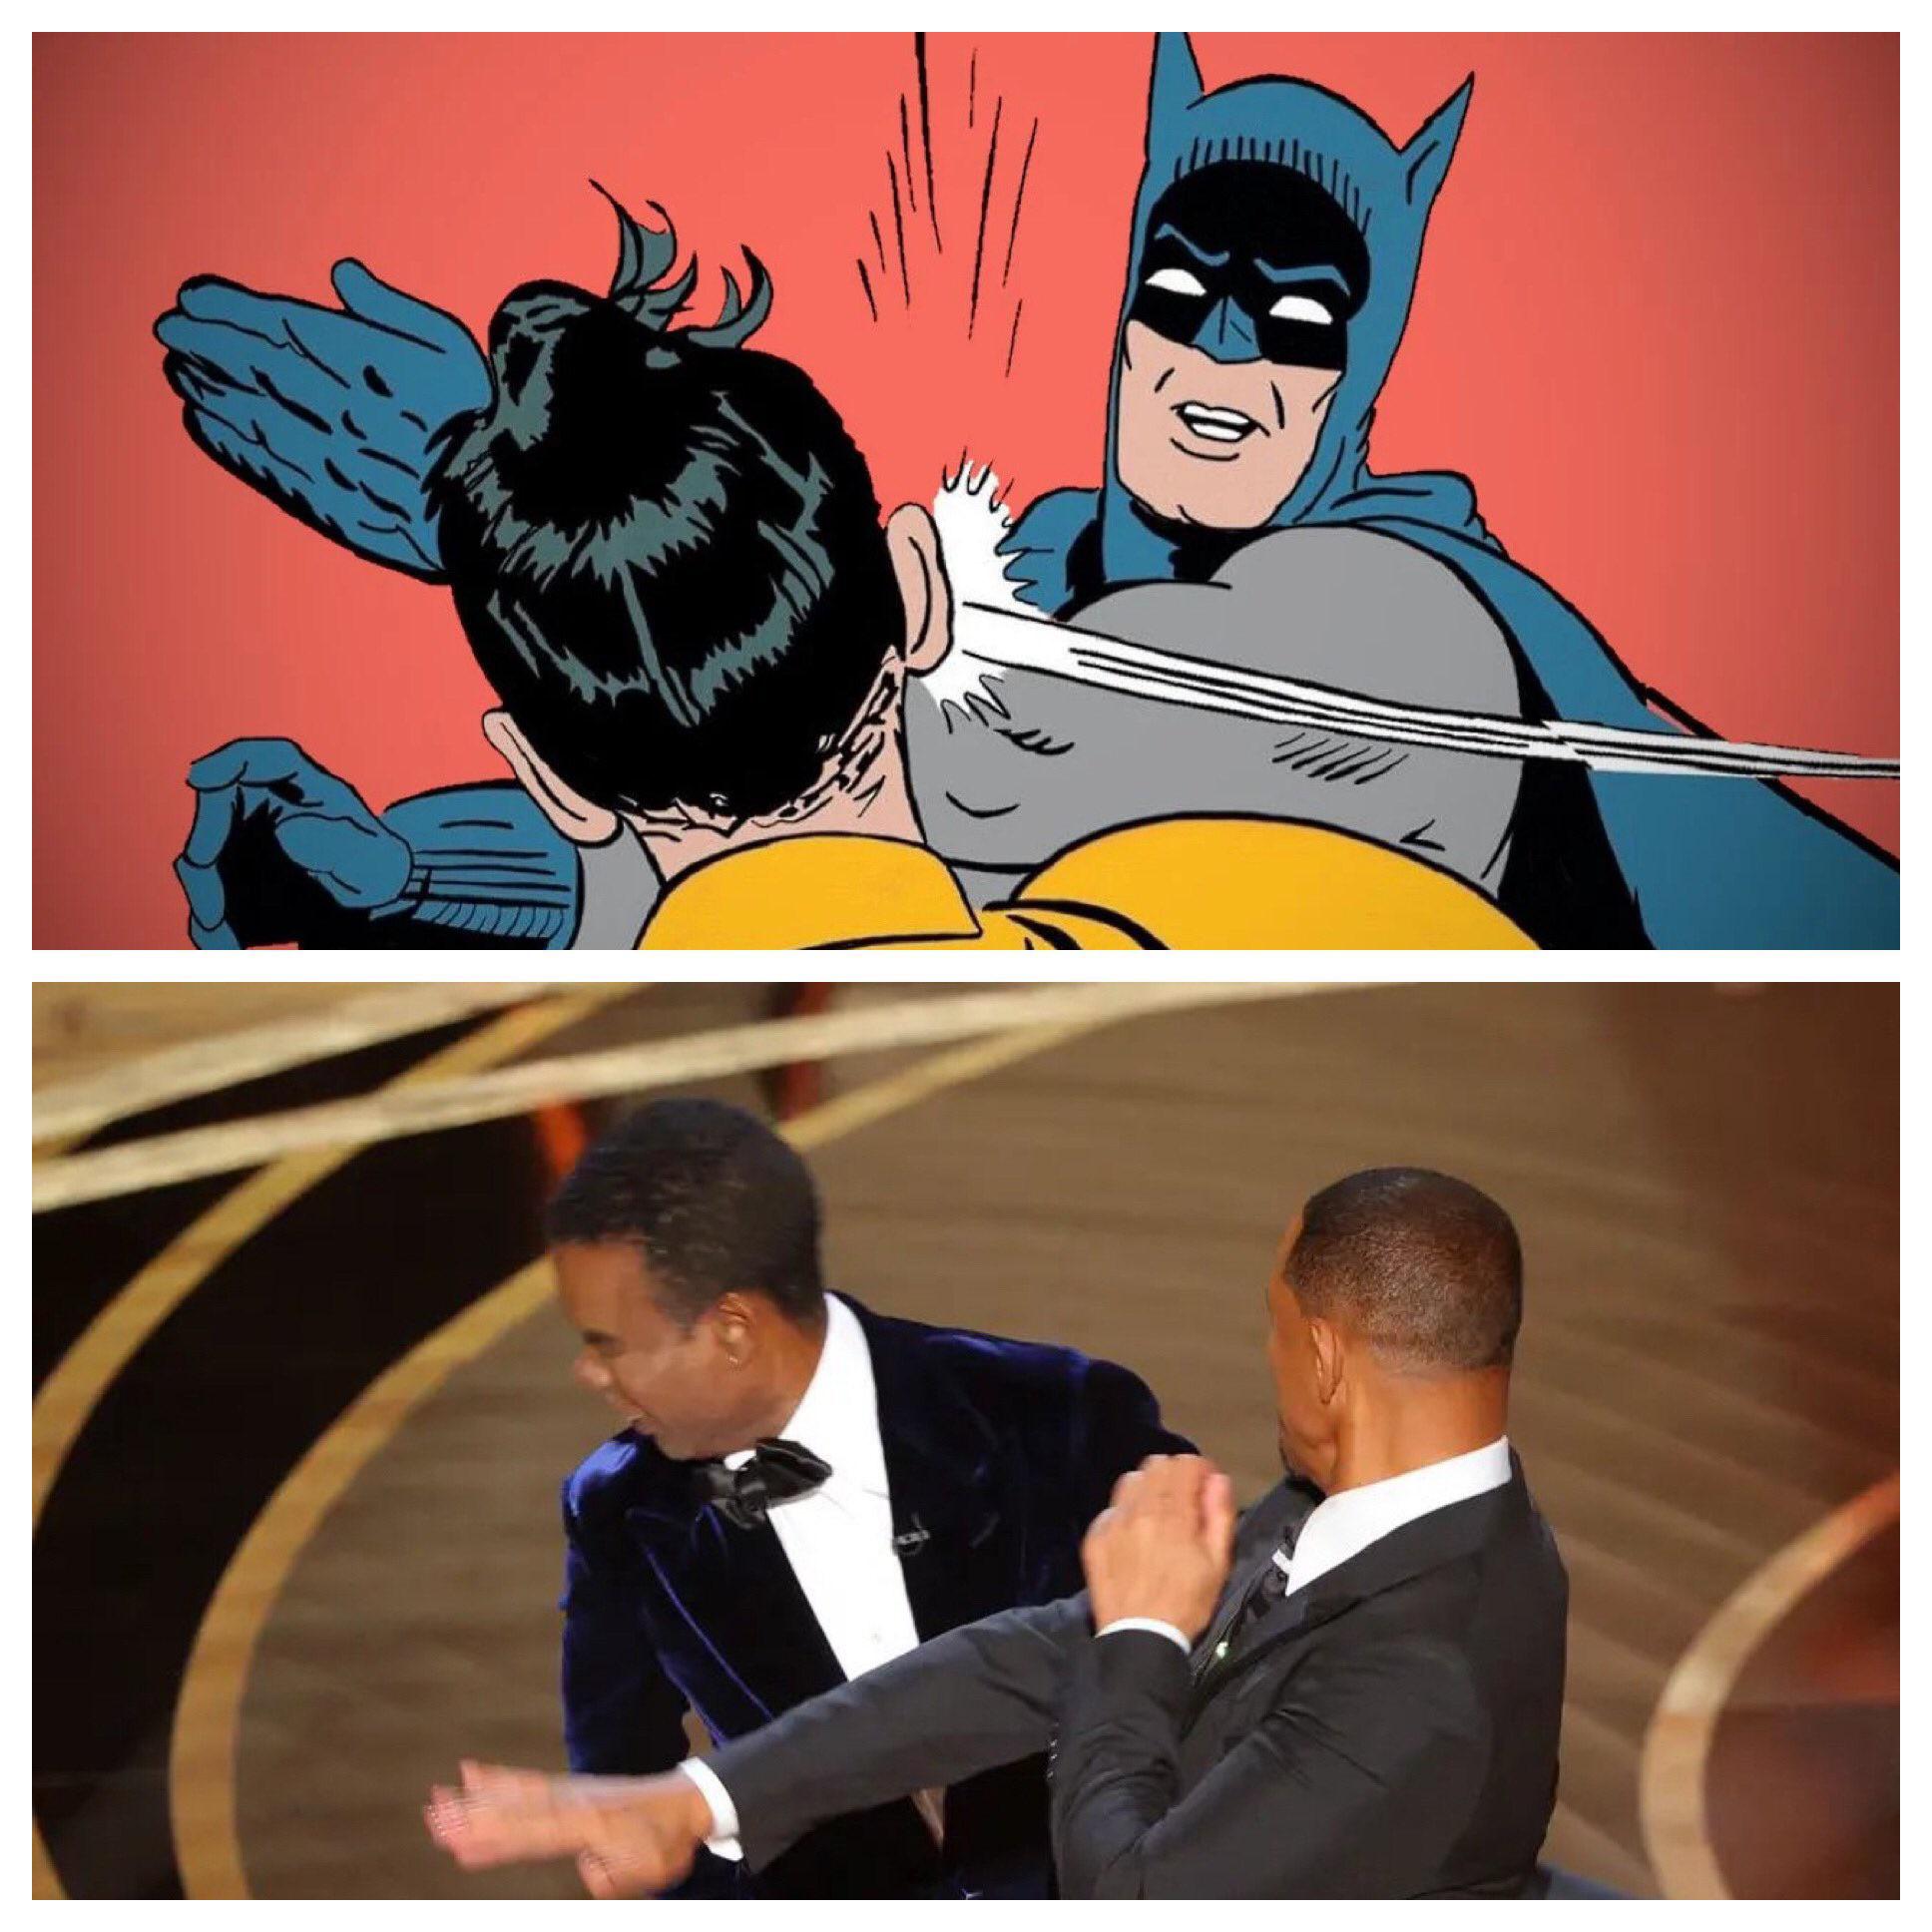 Batman slapping another man on upper picture and will smith slapping chris rock on the other picture below